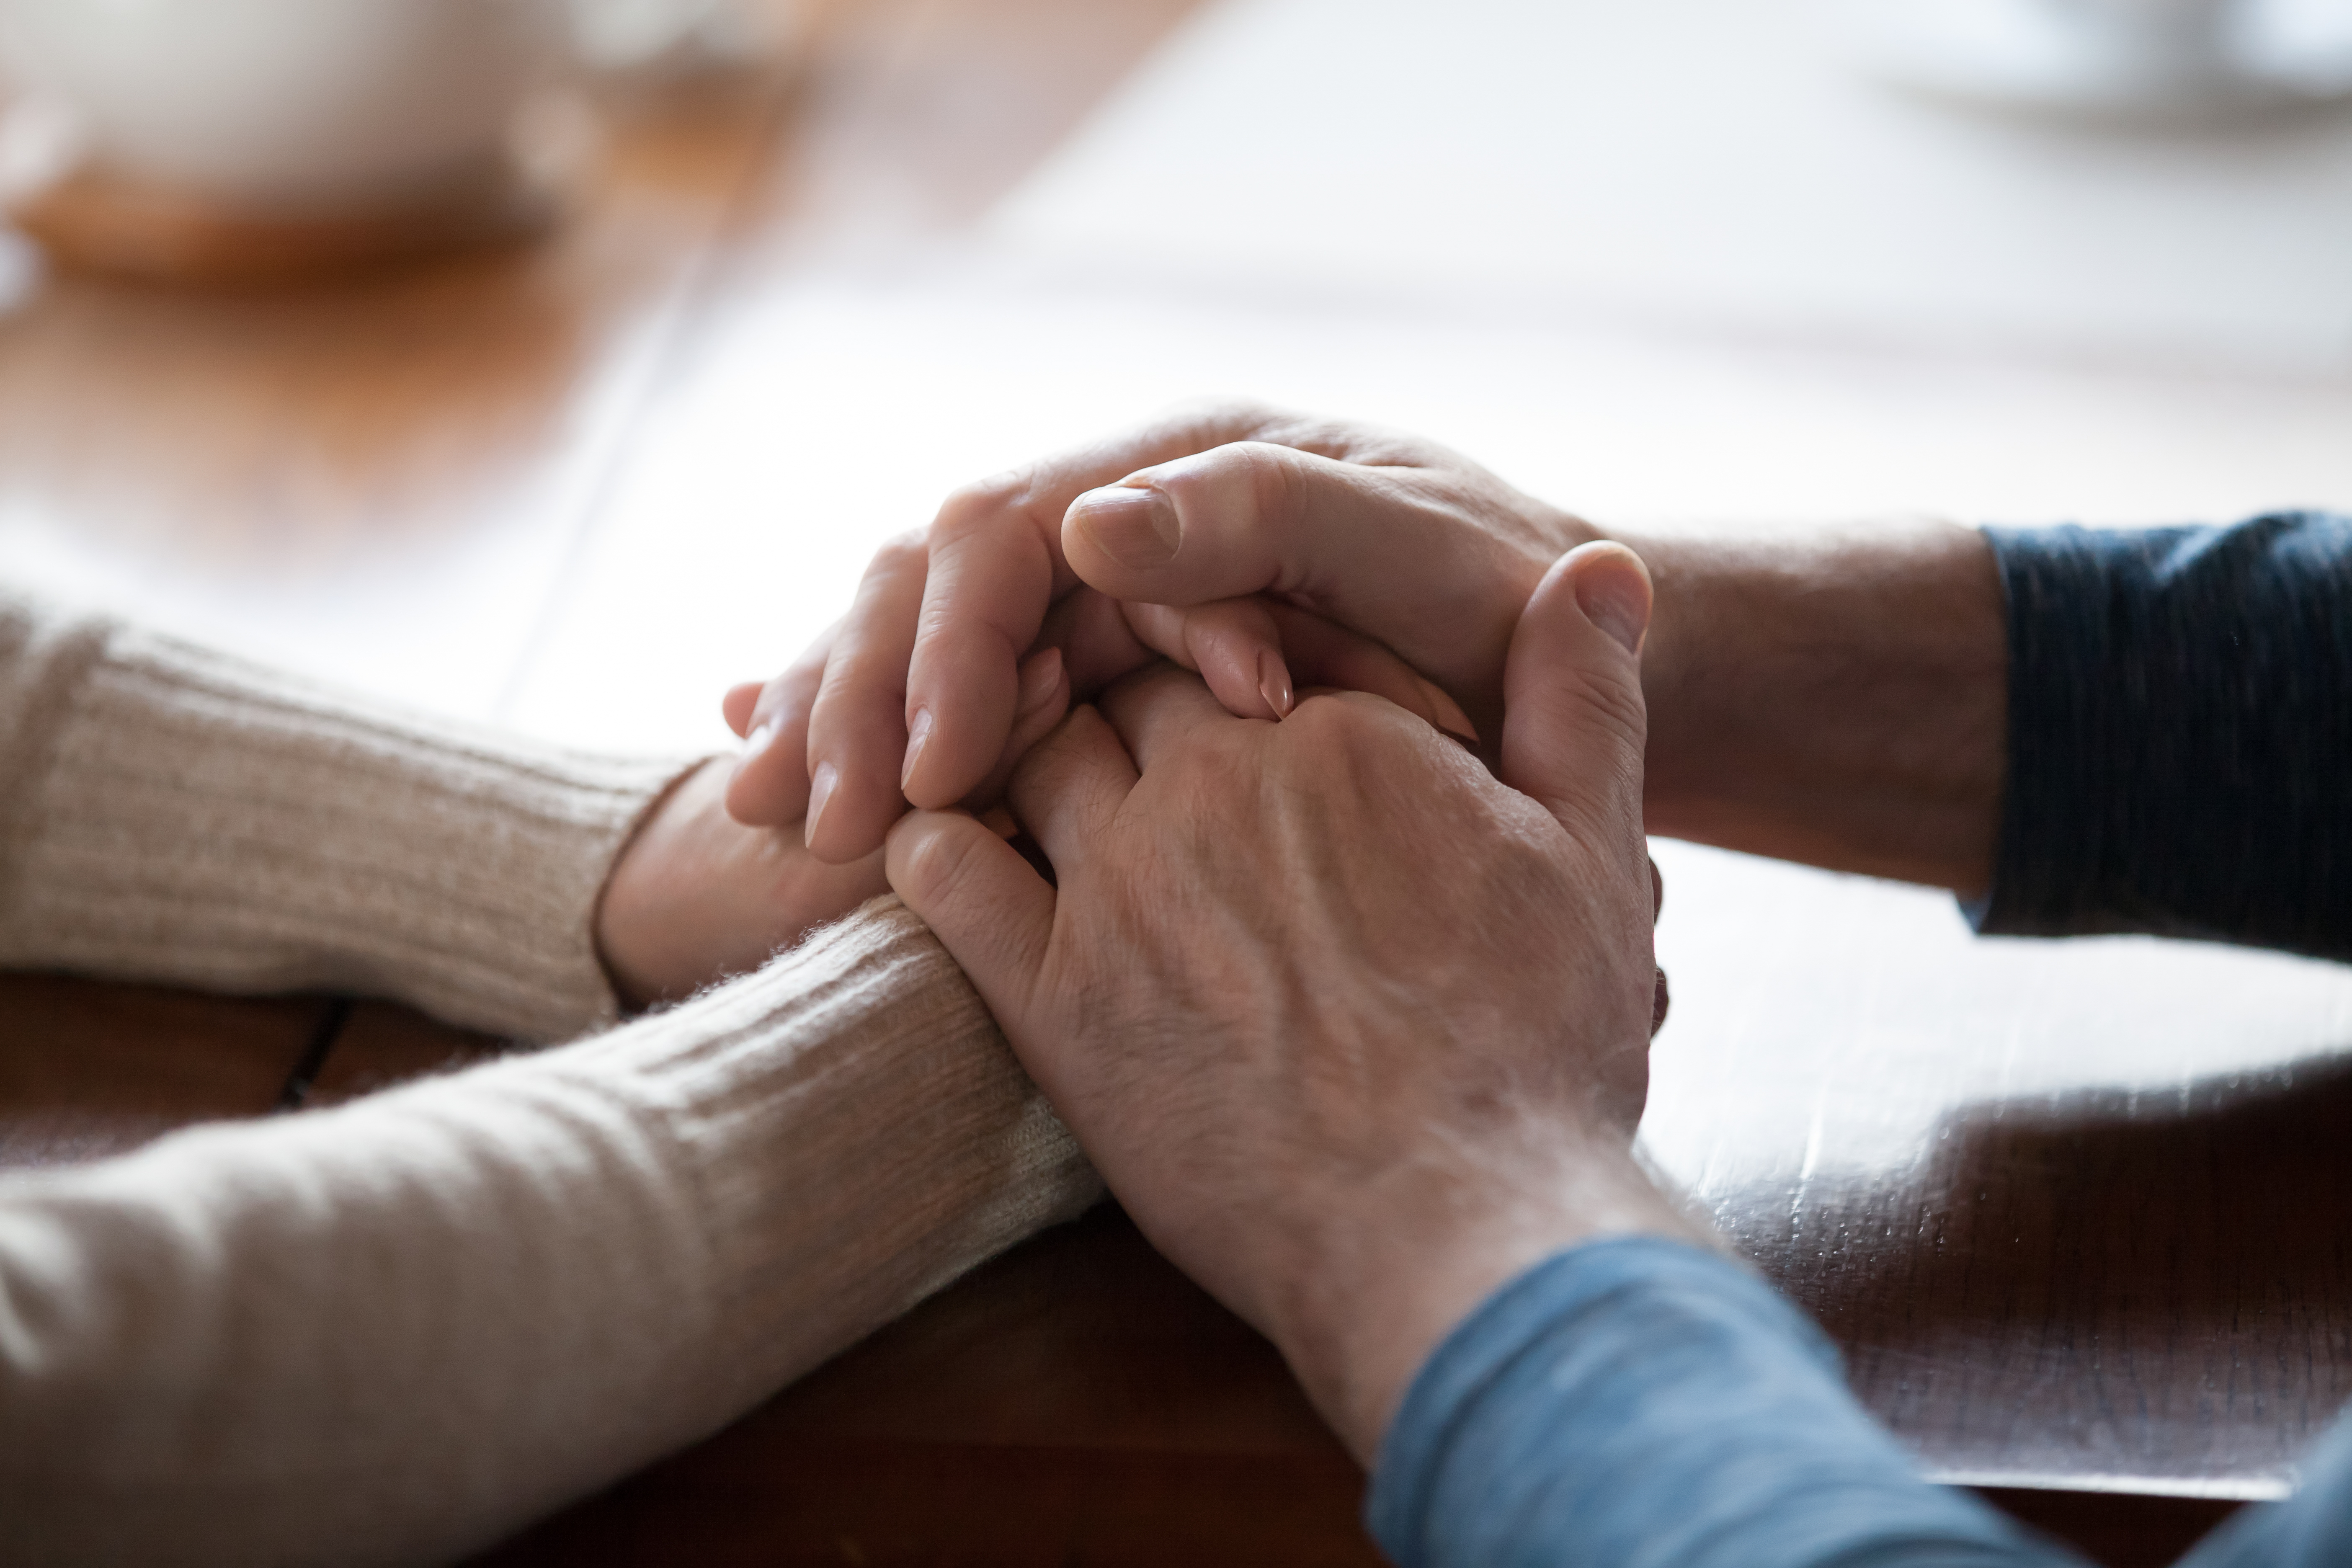 Couple holding hands as a gesture of support | Source: Shutterstock